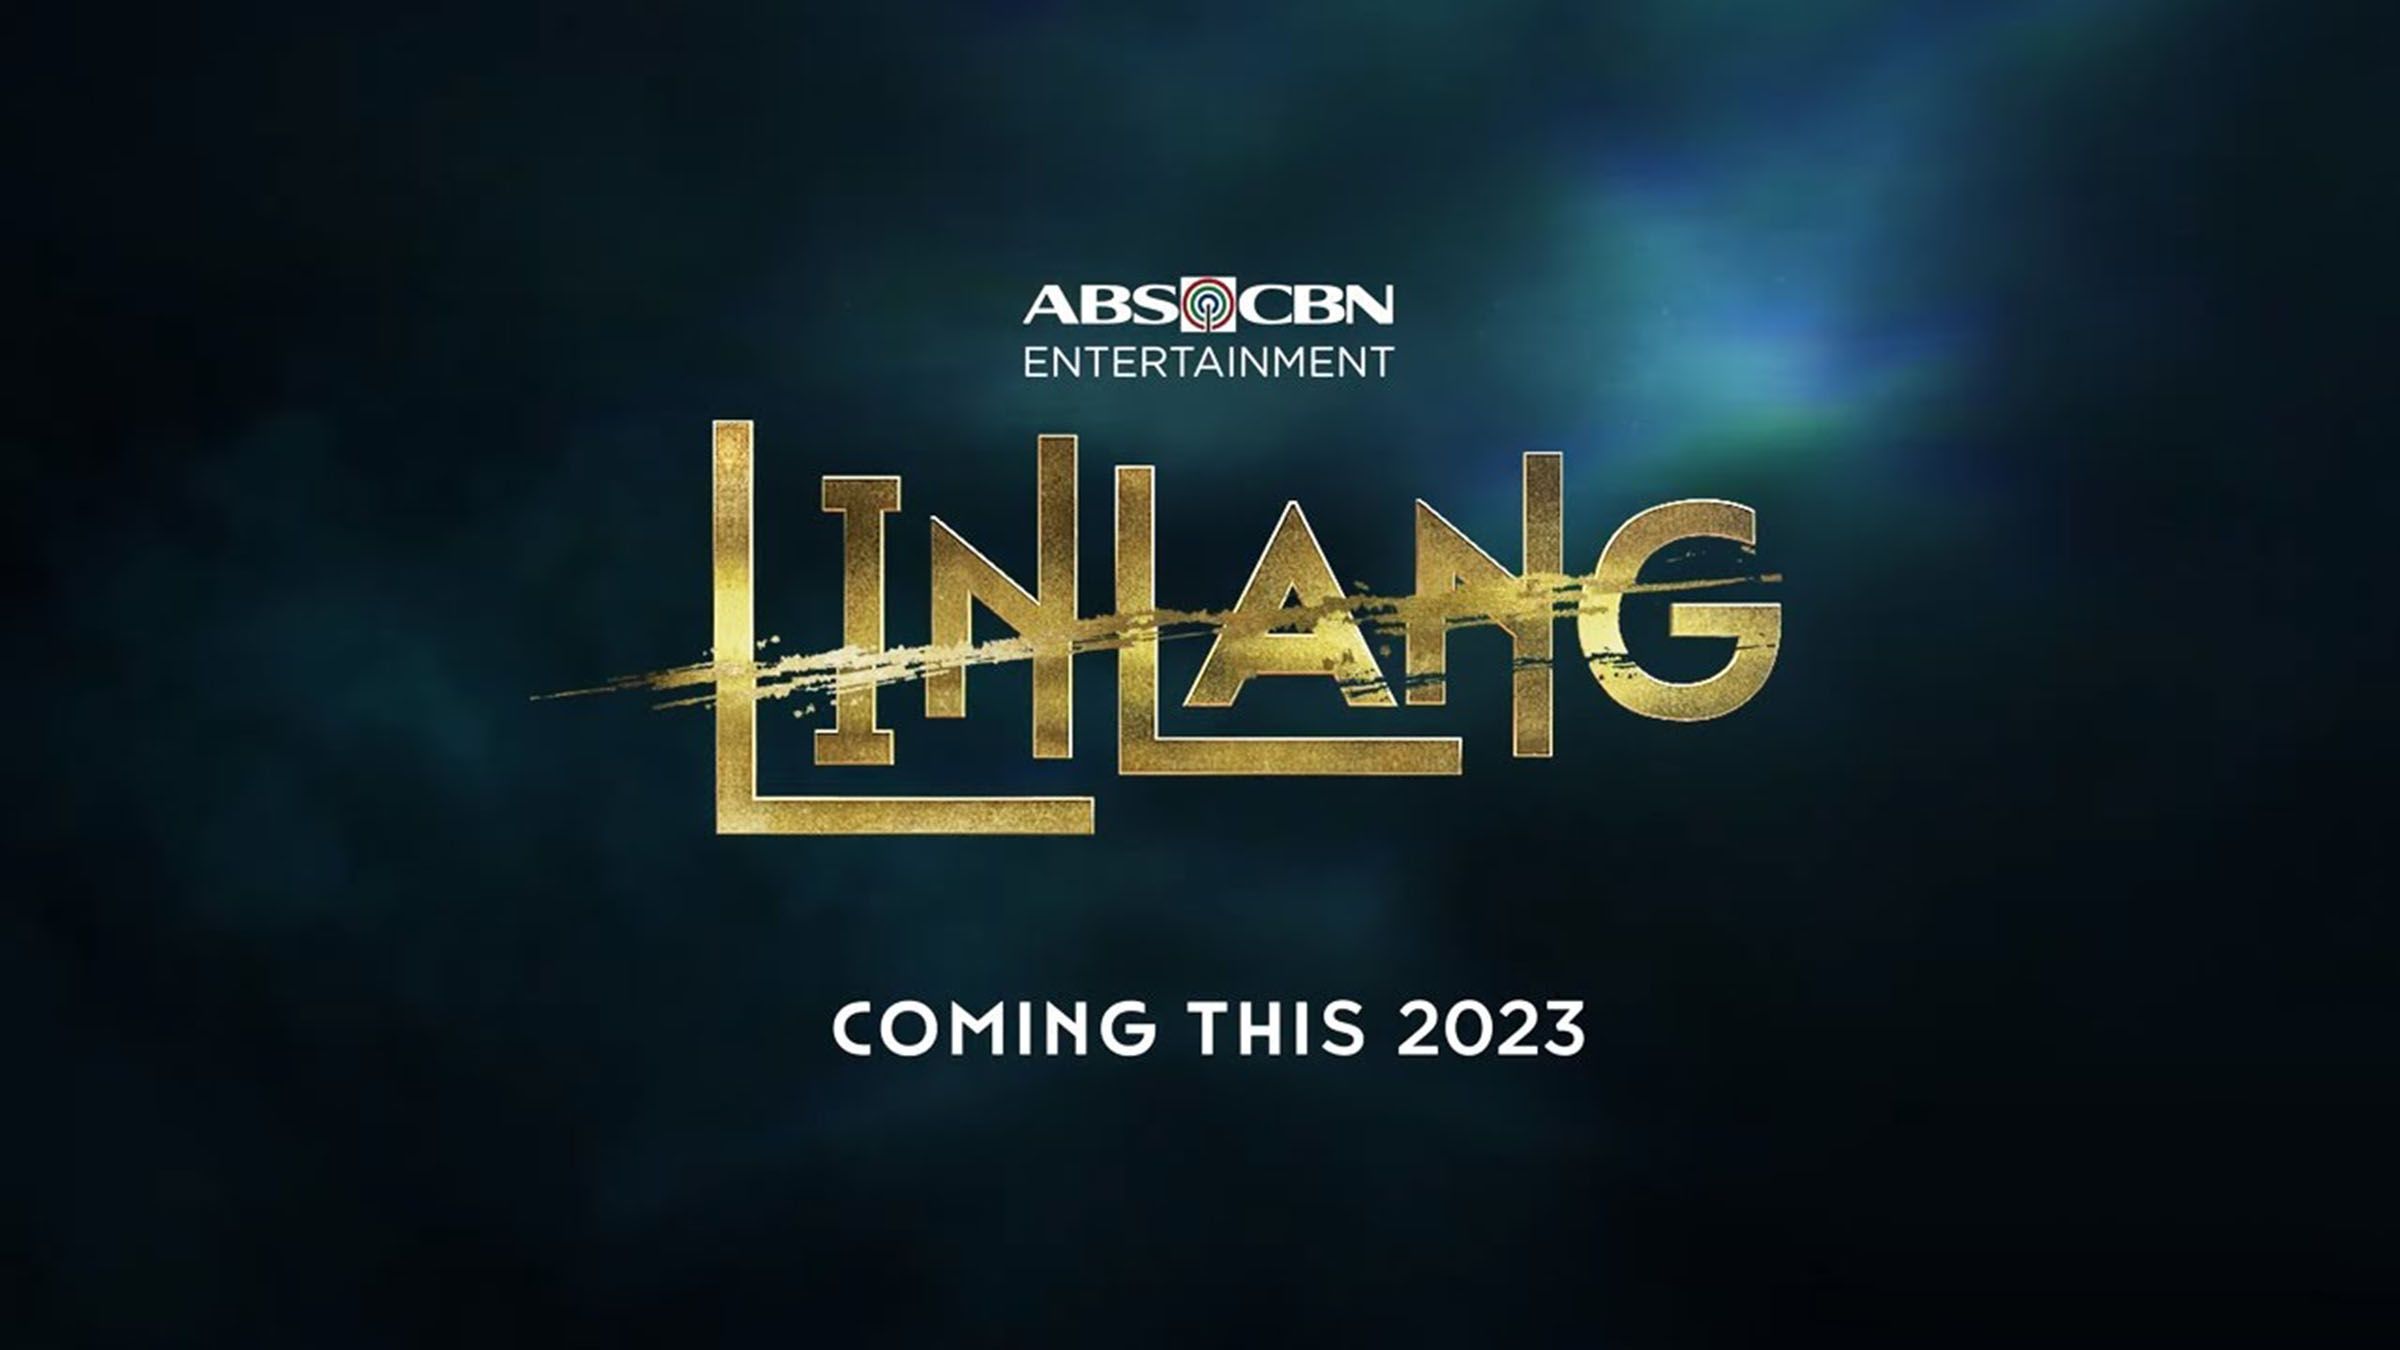 ABS-CBN series “Linlang” set to air in 2023